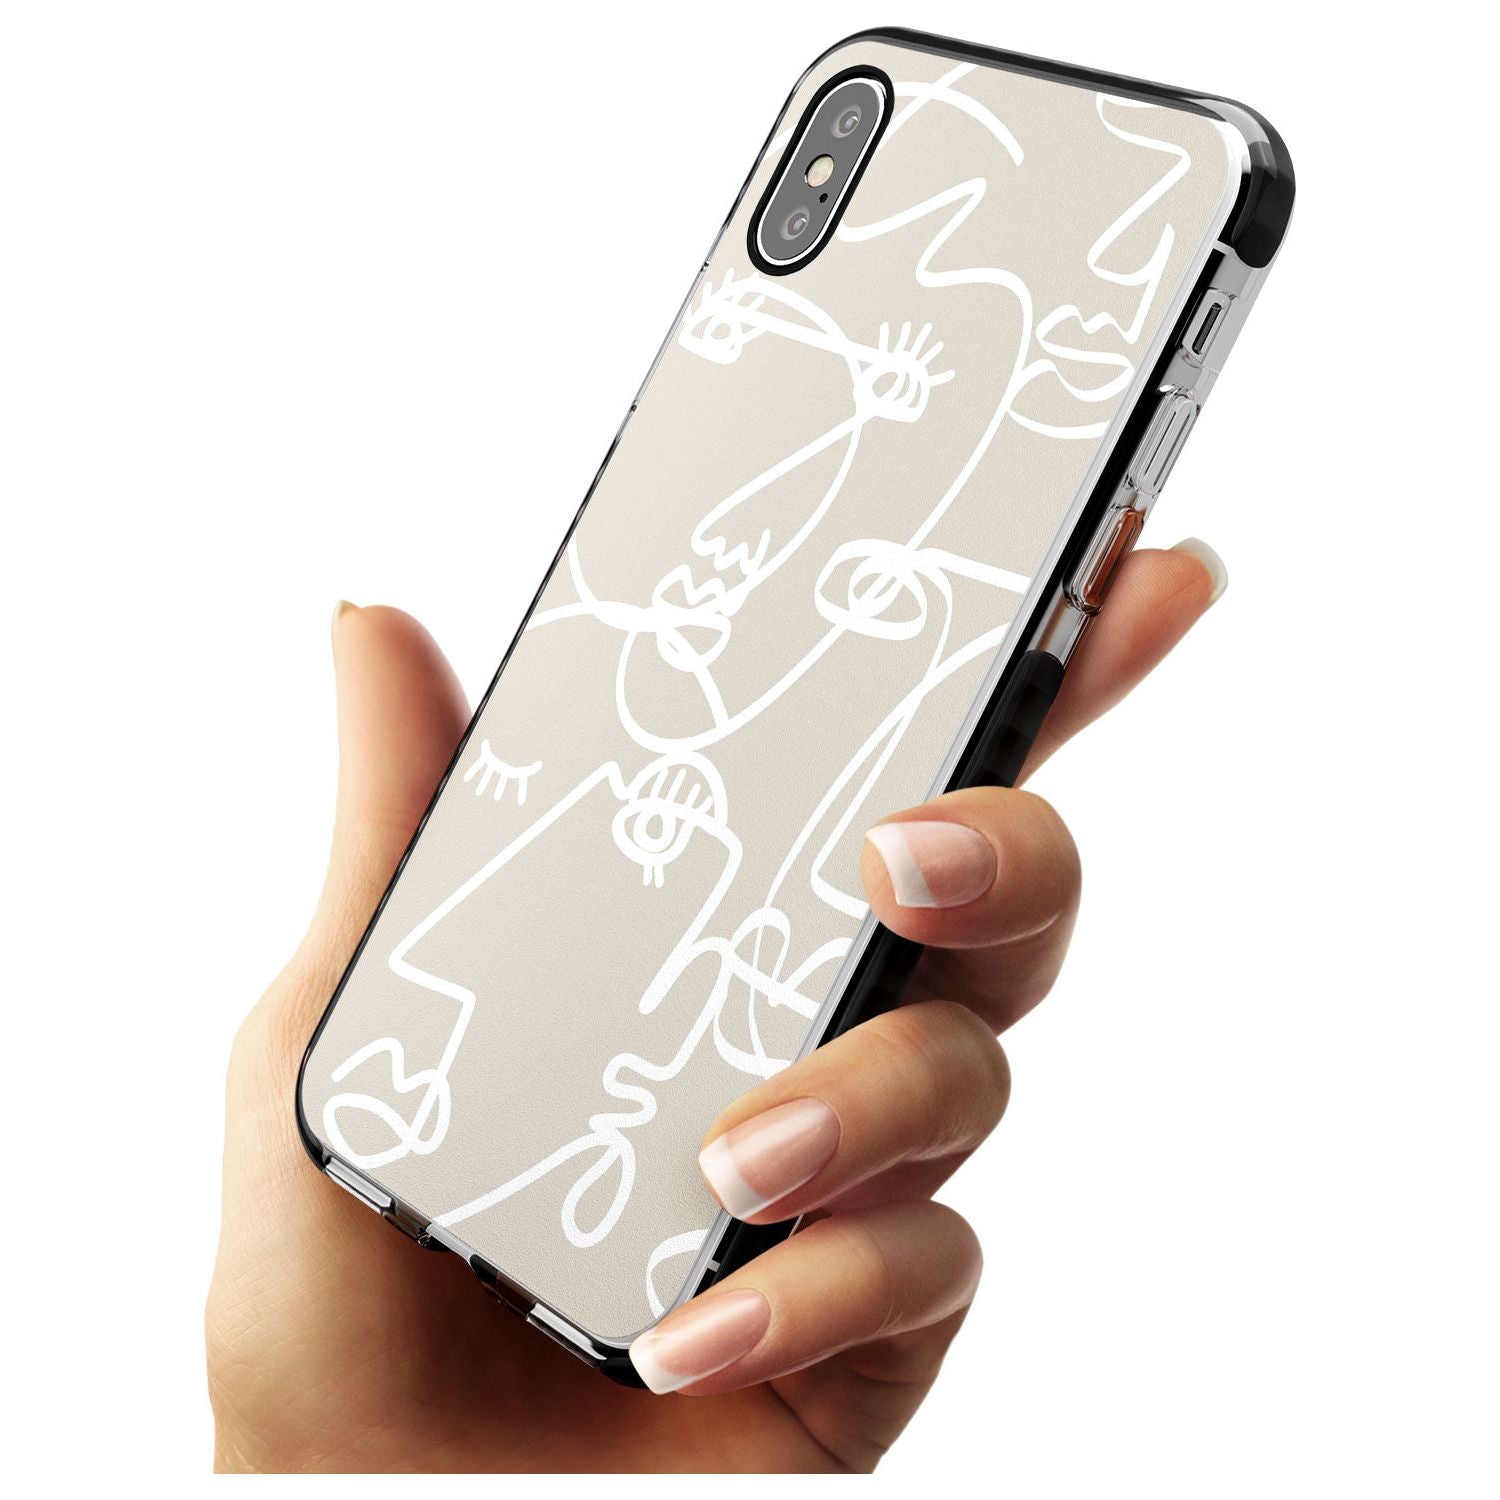 Continuous Line Faces: White on Beige Pink Fade Impact Phone Case for iPhone X XS Max XR